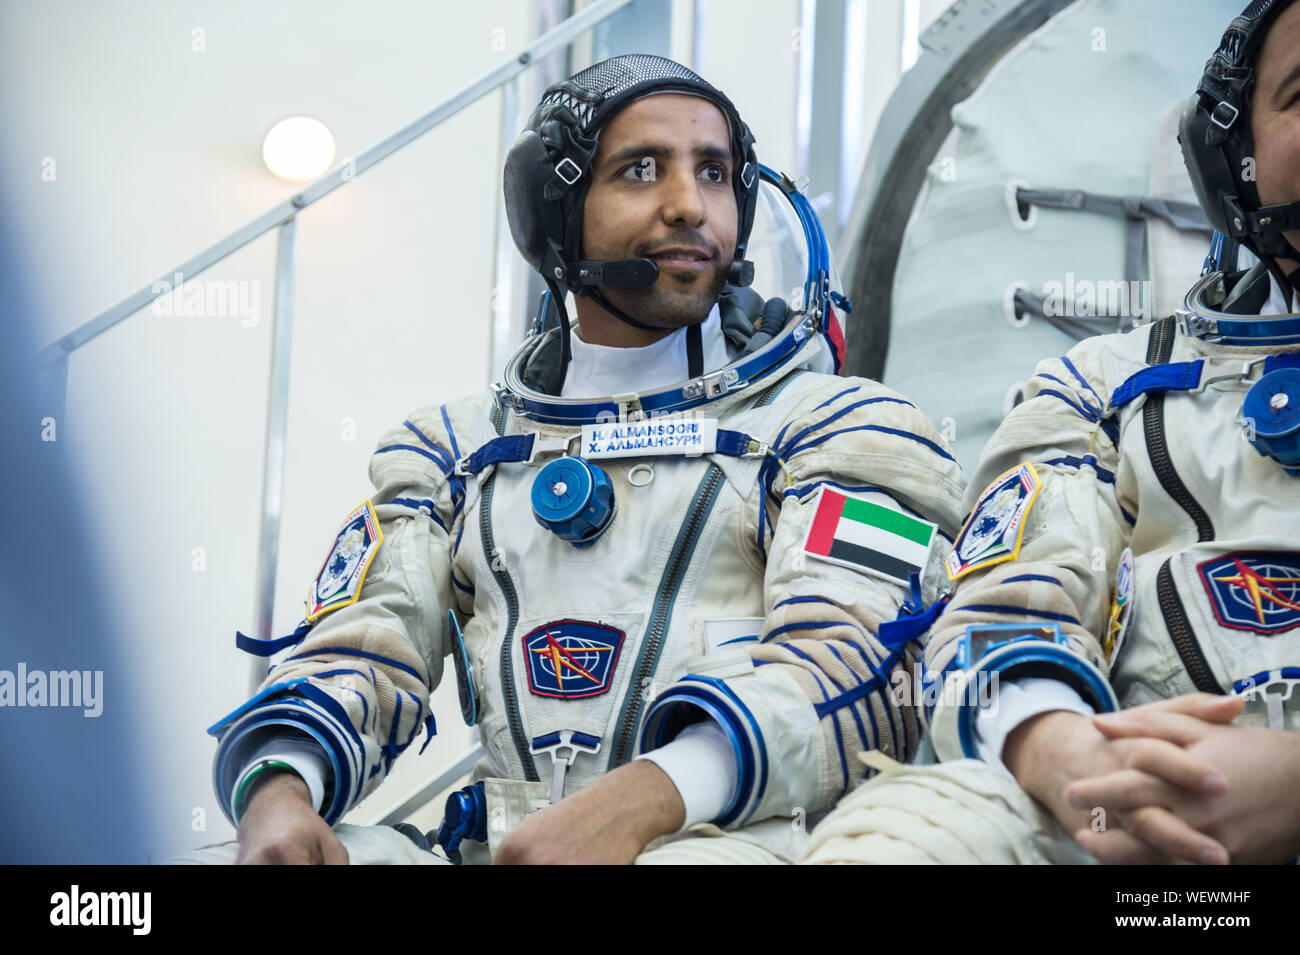 Star City, Russia. 30 August 2019. International Space Station Expedition 61 spaceflight participant Hazzaa Ali Almansoori of the United Arab Emirates in his Sokol space suit during final crew qualification exams at the Gagarin Cosmonaut Training Center August 30, 2019 in Star City, Russia. Expedition 61-62 is expected to launch to the International Space Station on September 25, 2019. Credit: NASA/Planetpix/Alamy Live News Stock Photo